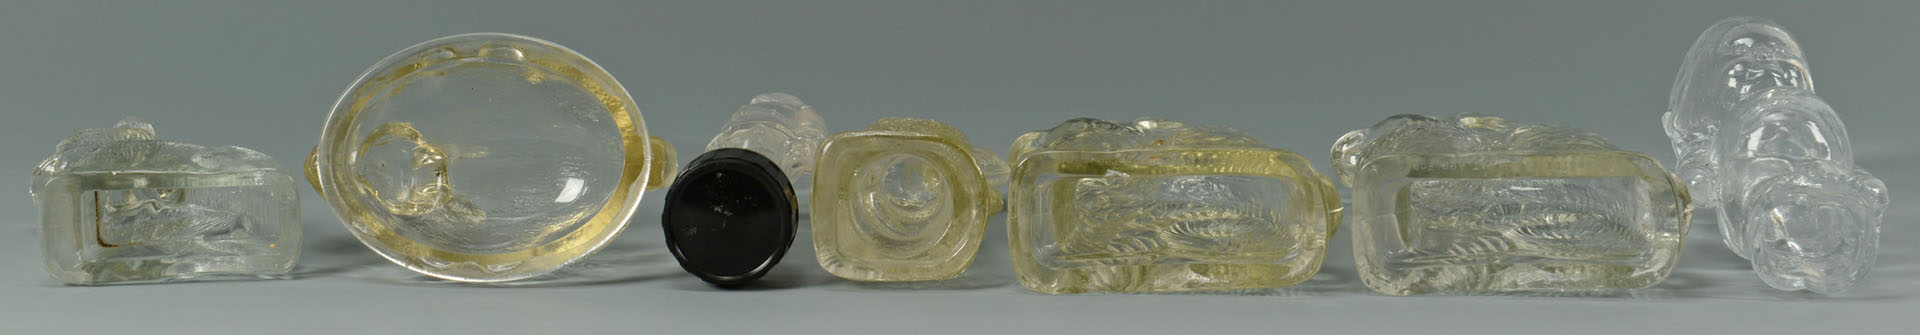 Lot 664: 29 American Glass Candy Containers